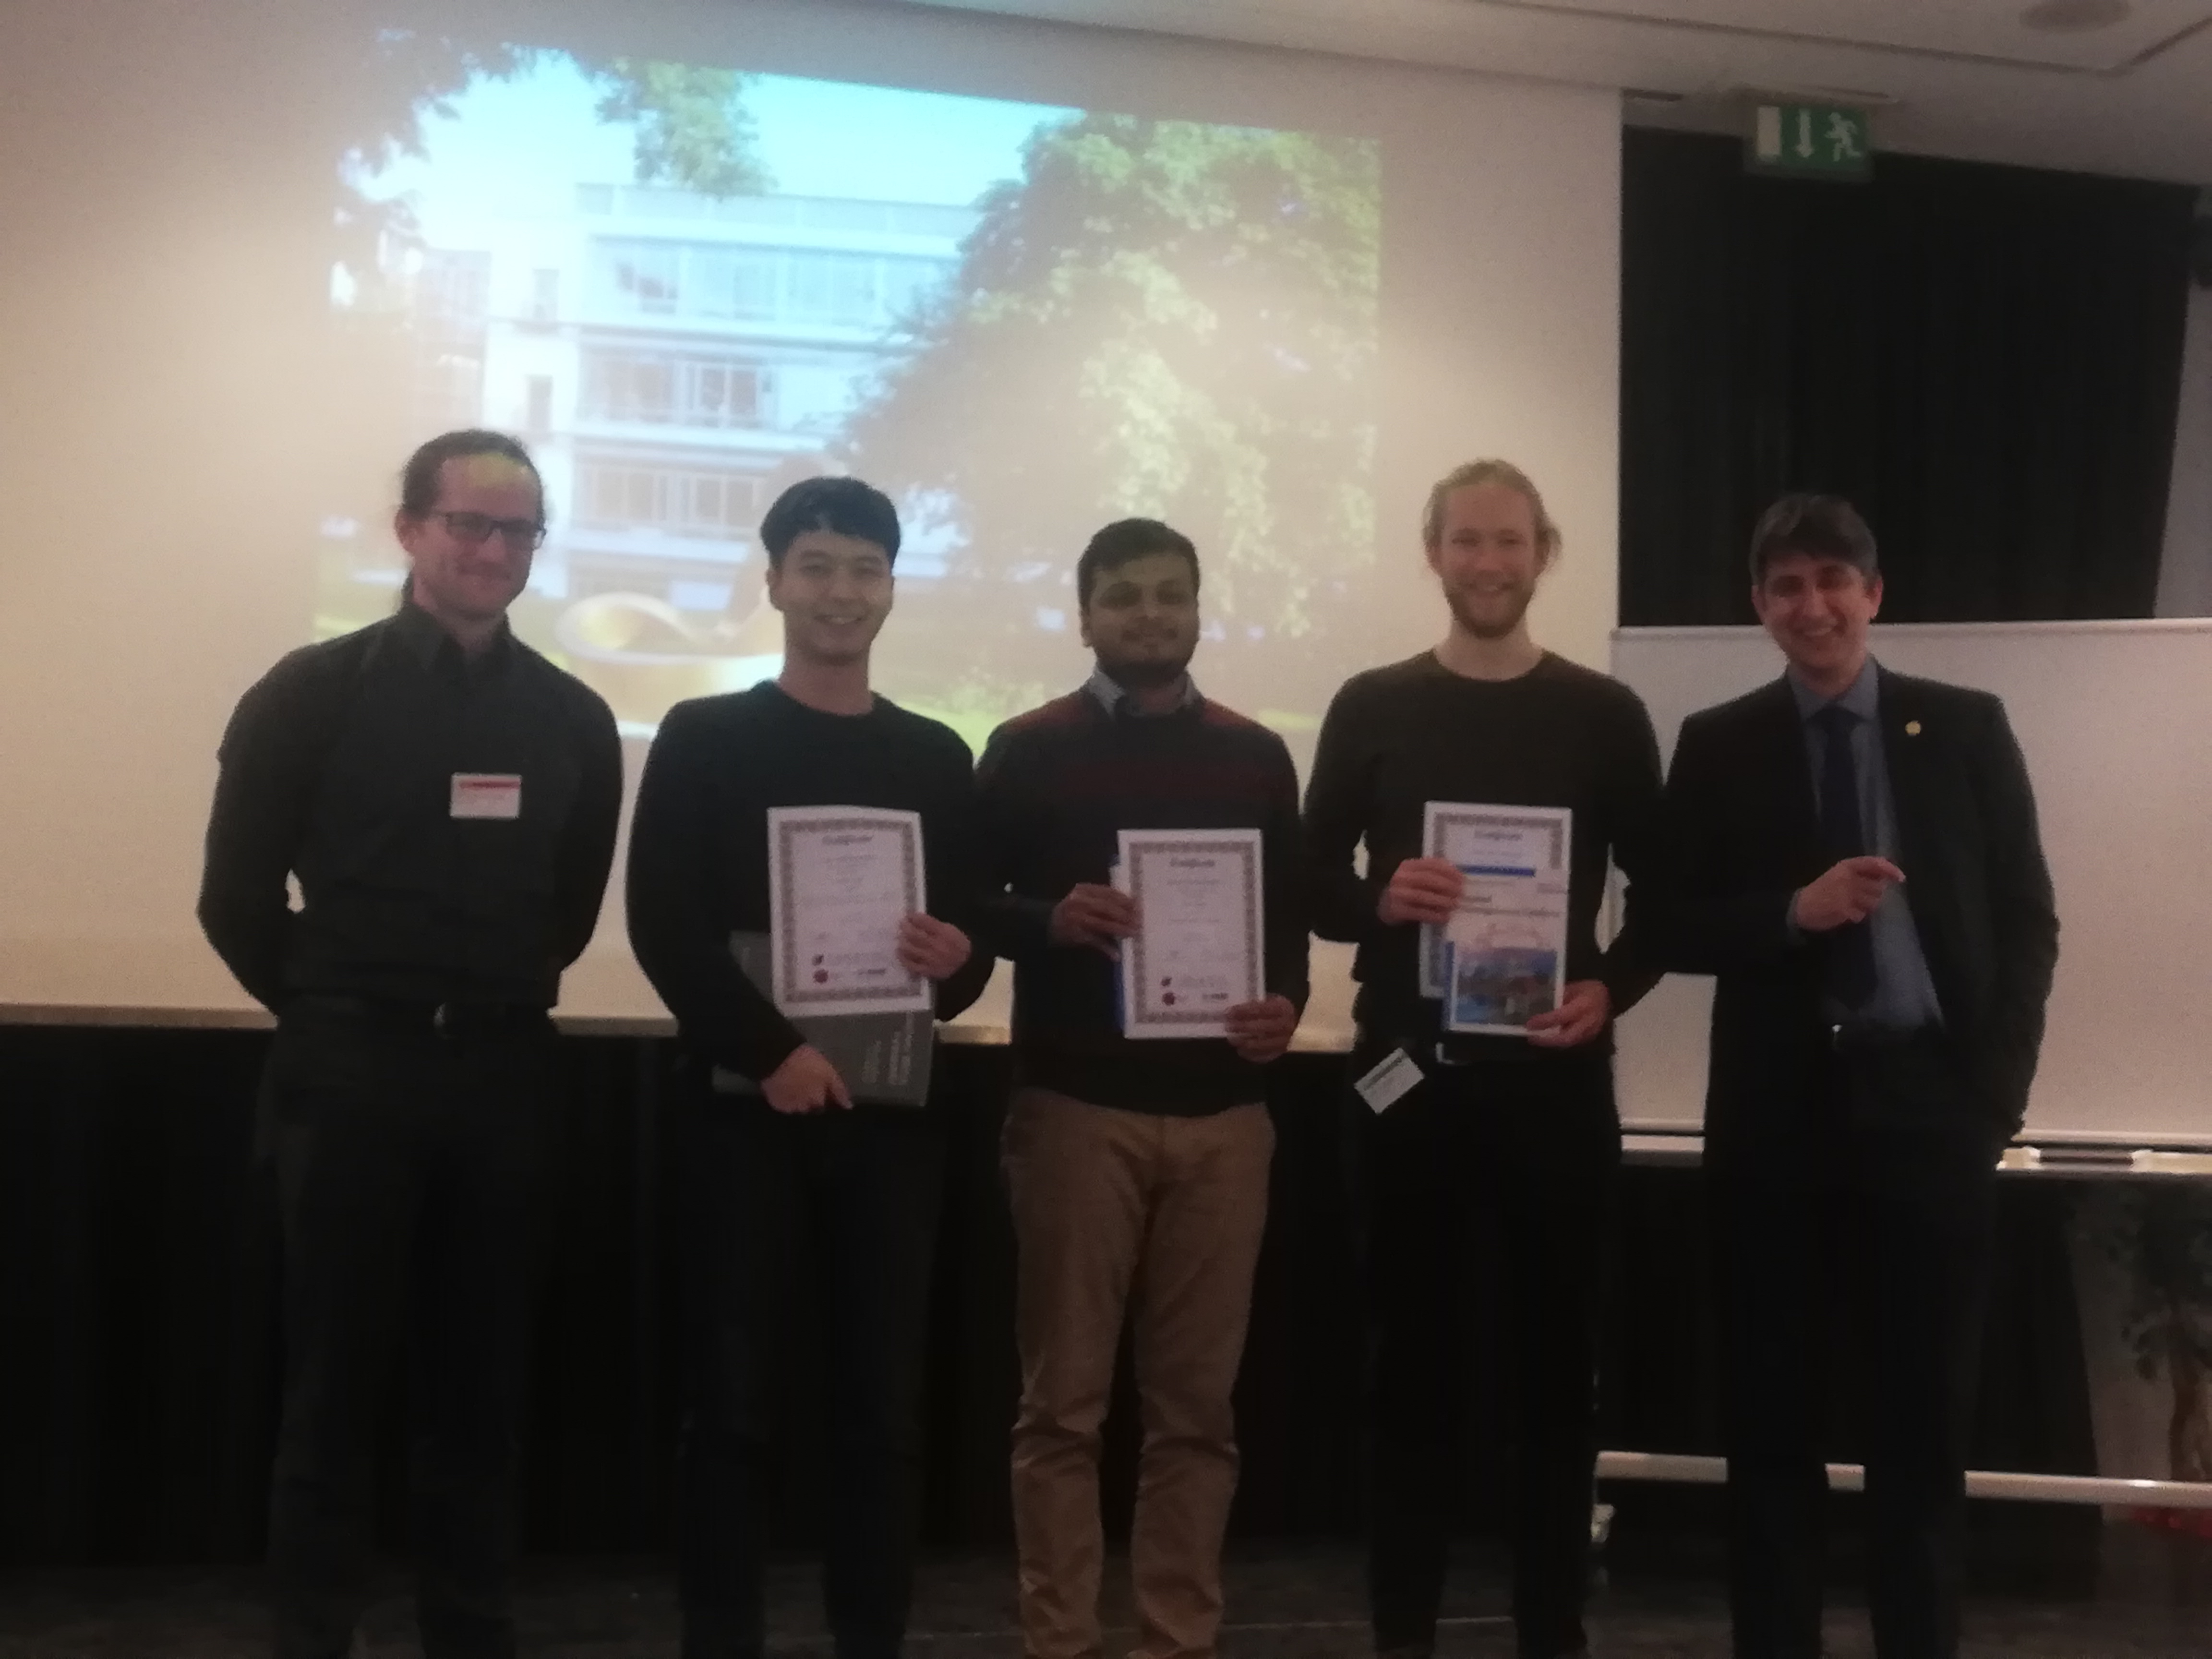 Yoonsu received 'First Poster Award'  at the CaRLa Winter school, heidelberg, Germany